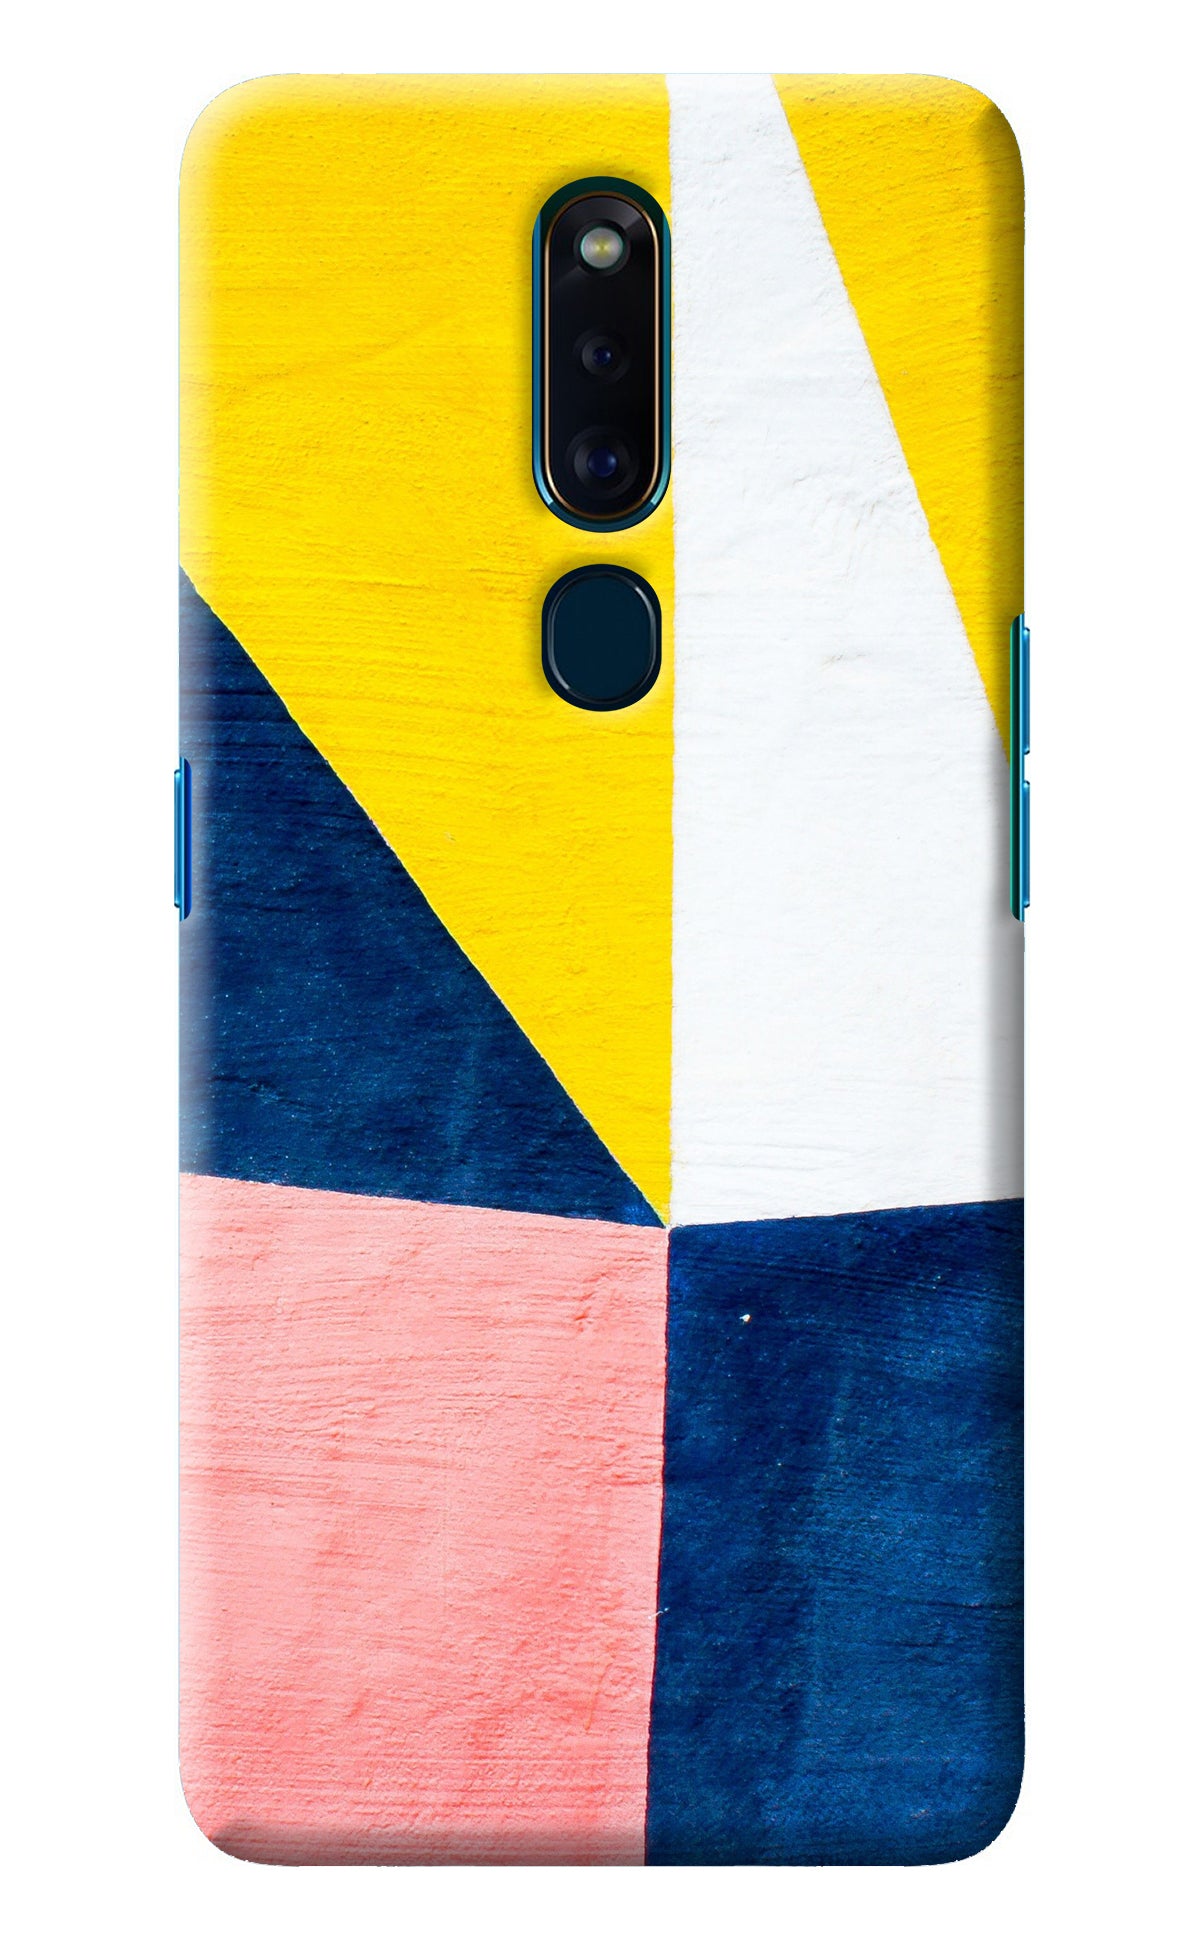 Colourful Art Oppo F11 Pro Back Cover